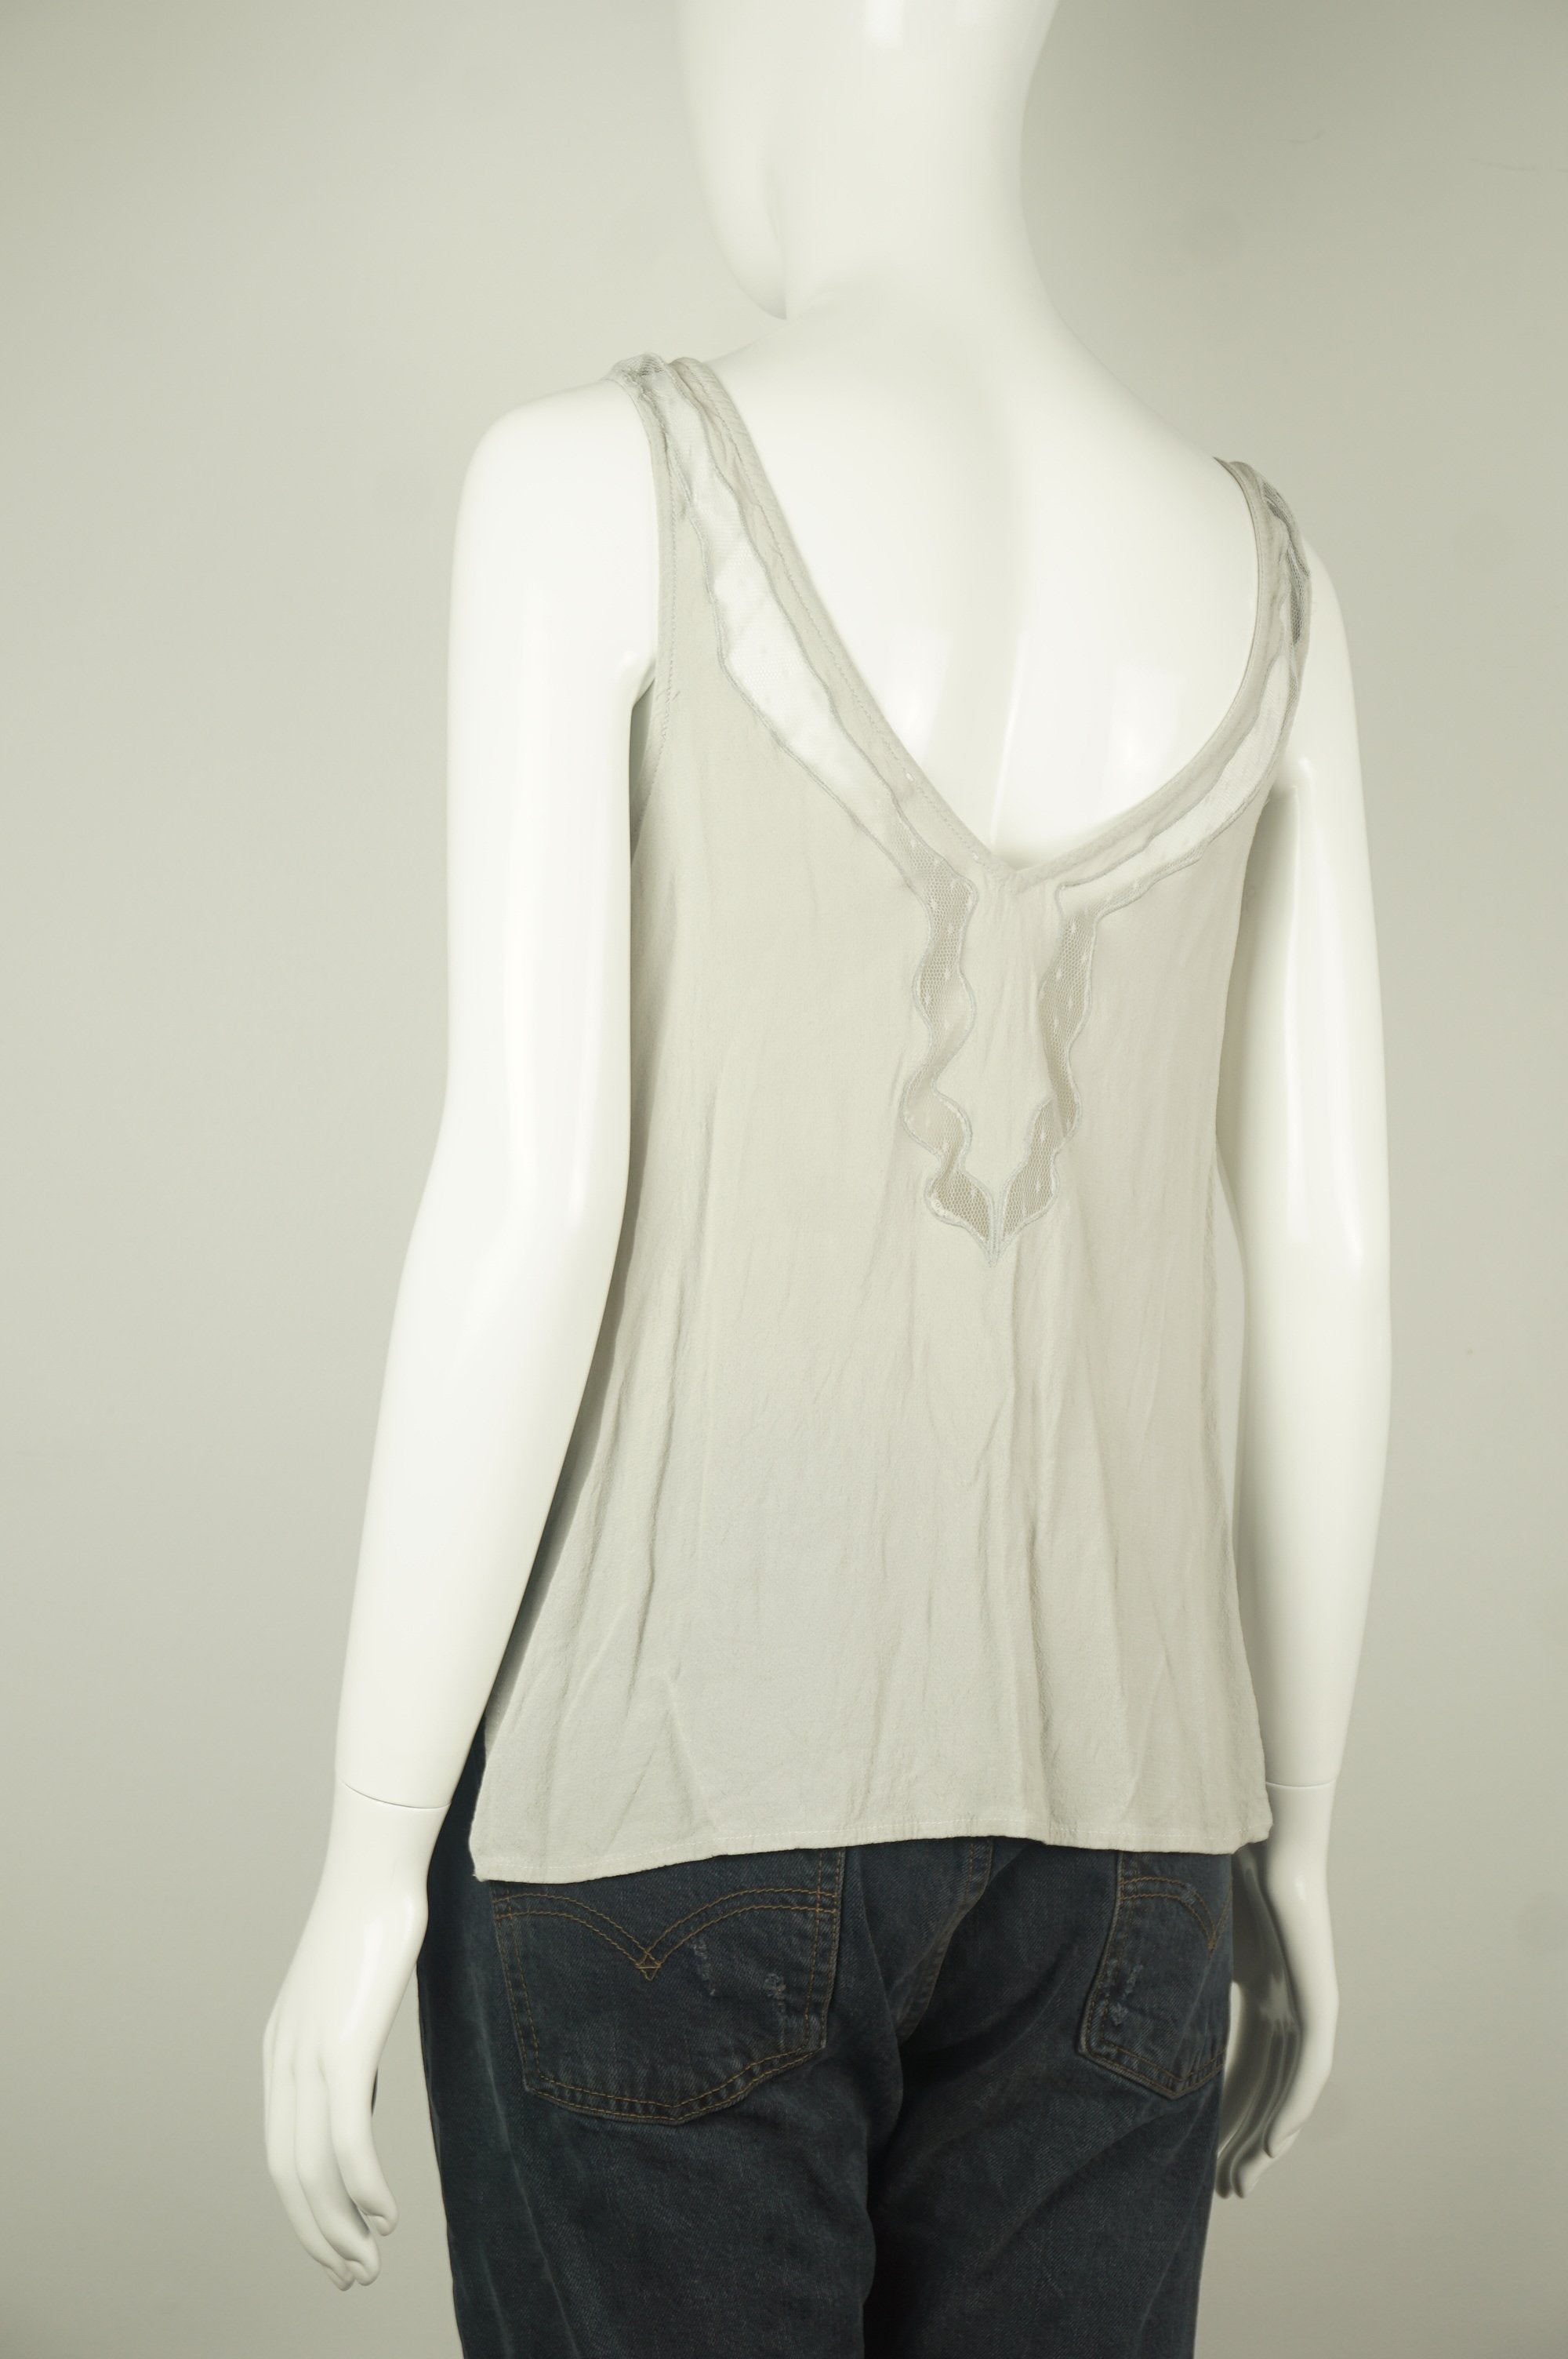 Lush Sleeveless Tank Top, Dressy and casual at the same time, this sleeveless grey shirt gives you a stunning and sexy look with subtly open sides. , Grey, Lightweight fabric. , women's Tops, women's Grey Tops, Lush women's Tops, women's crop top, lush women's long sleeve crop top